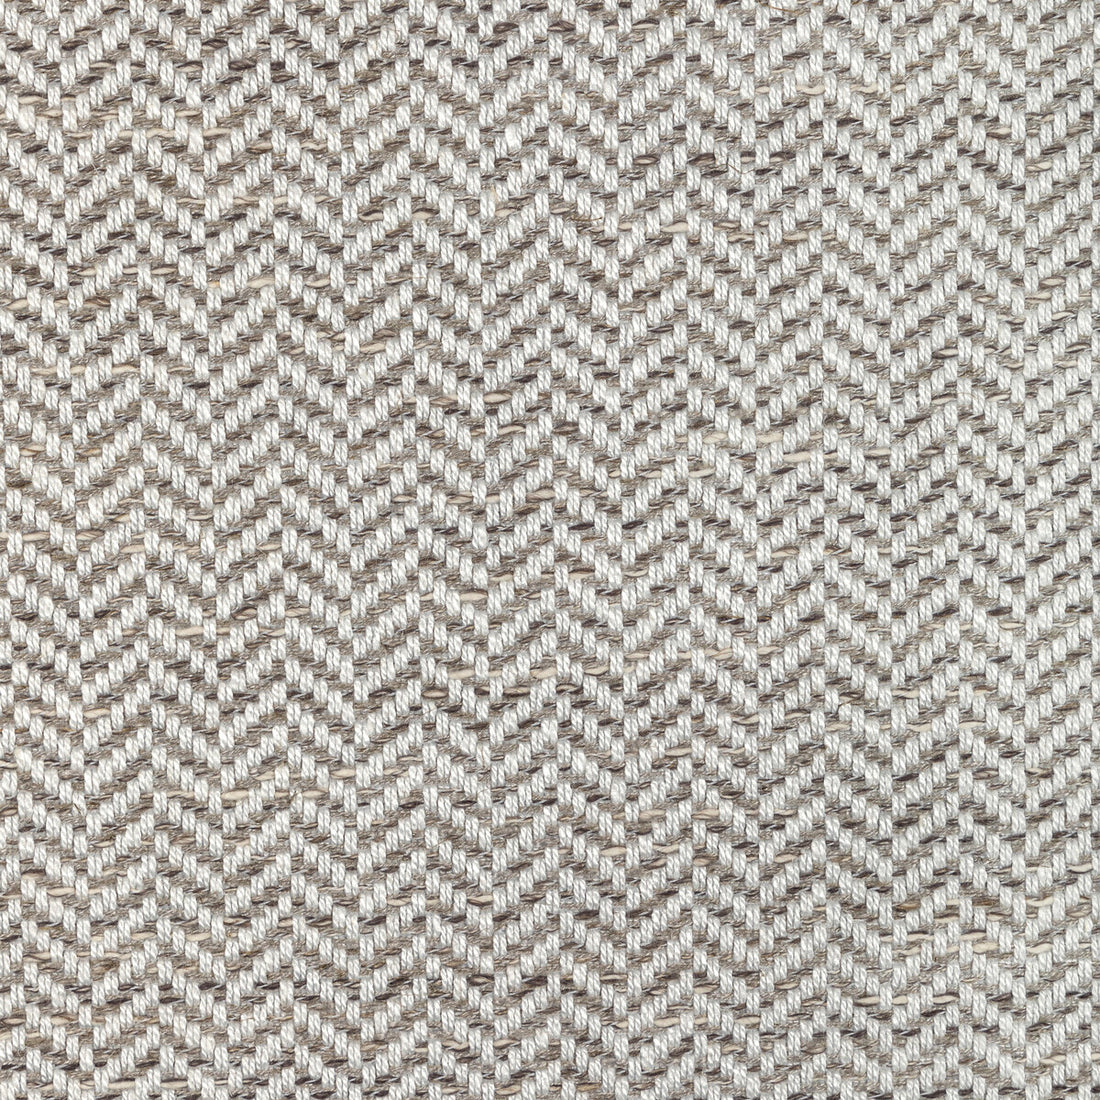 Verve Weave fabric in dove color - pattern 36358.1611.0 - by Kravet Couture in the Corey Damen Jenkins Trad Nouveau collection